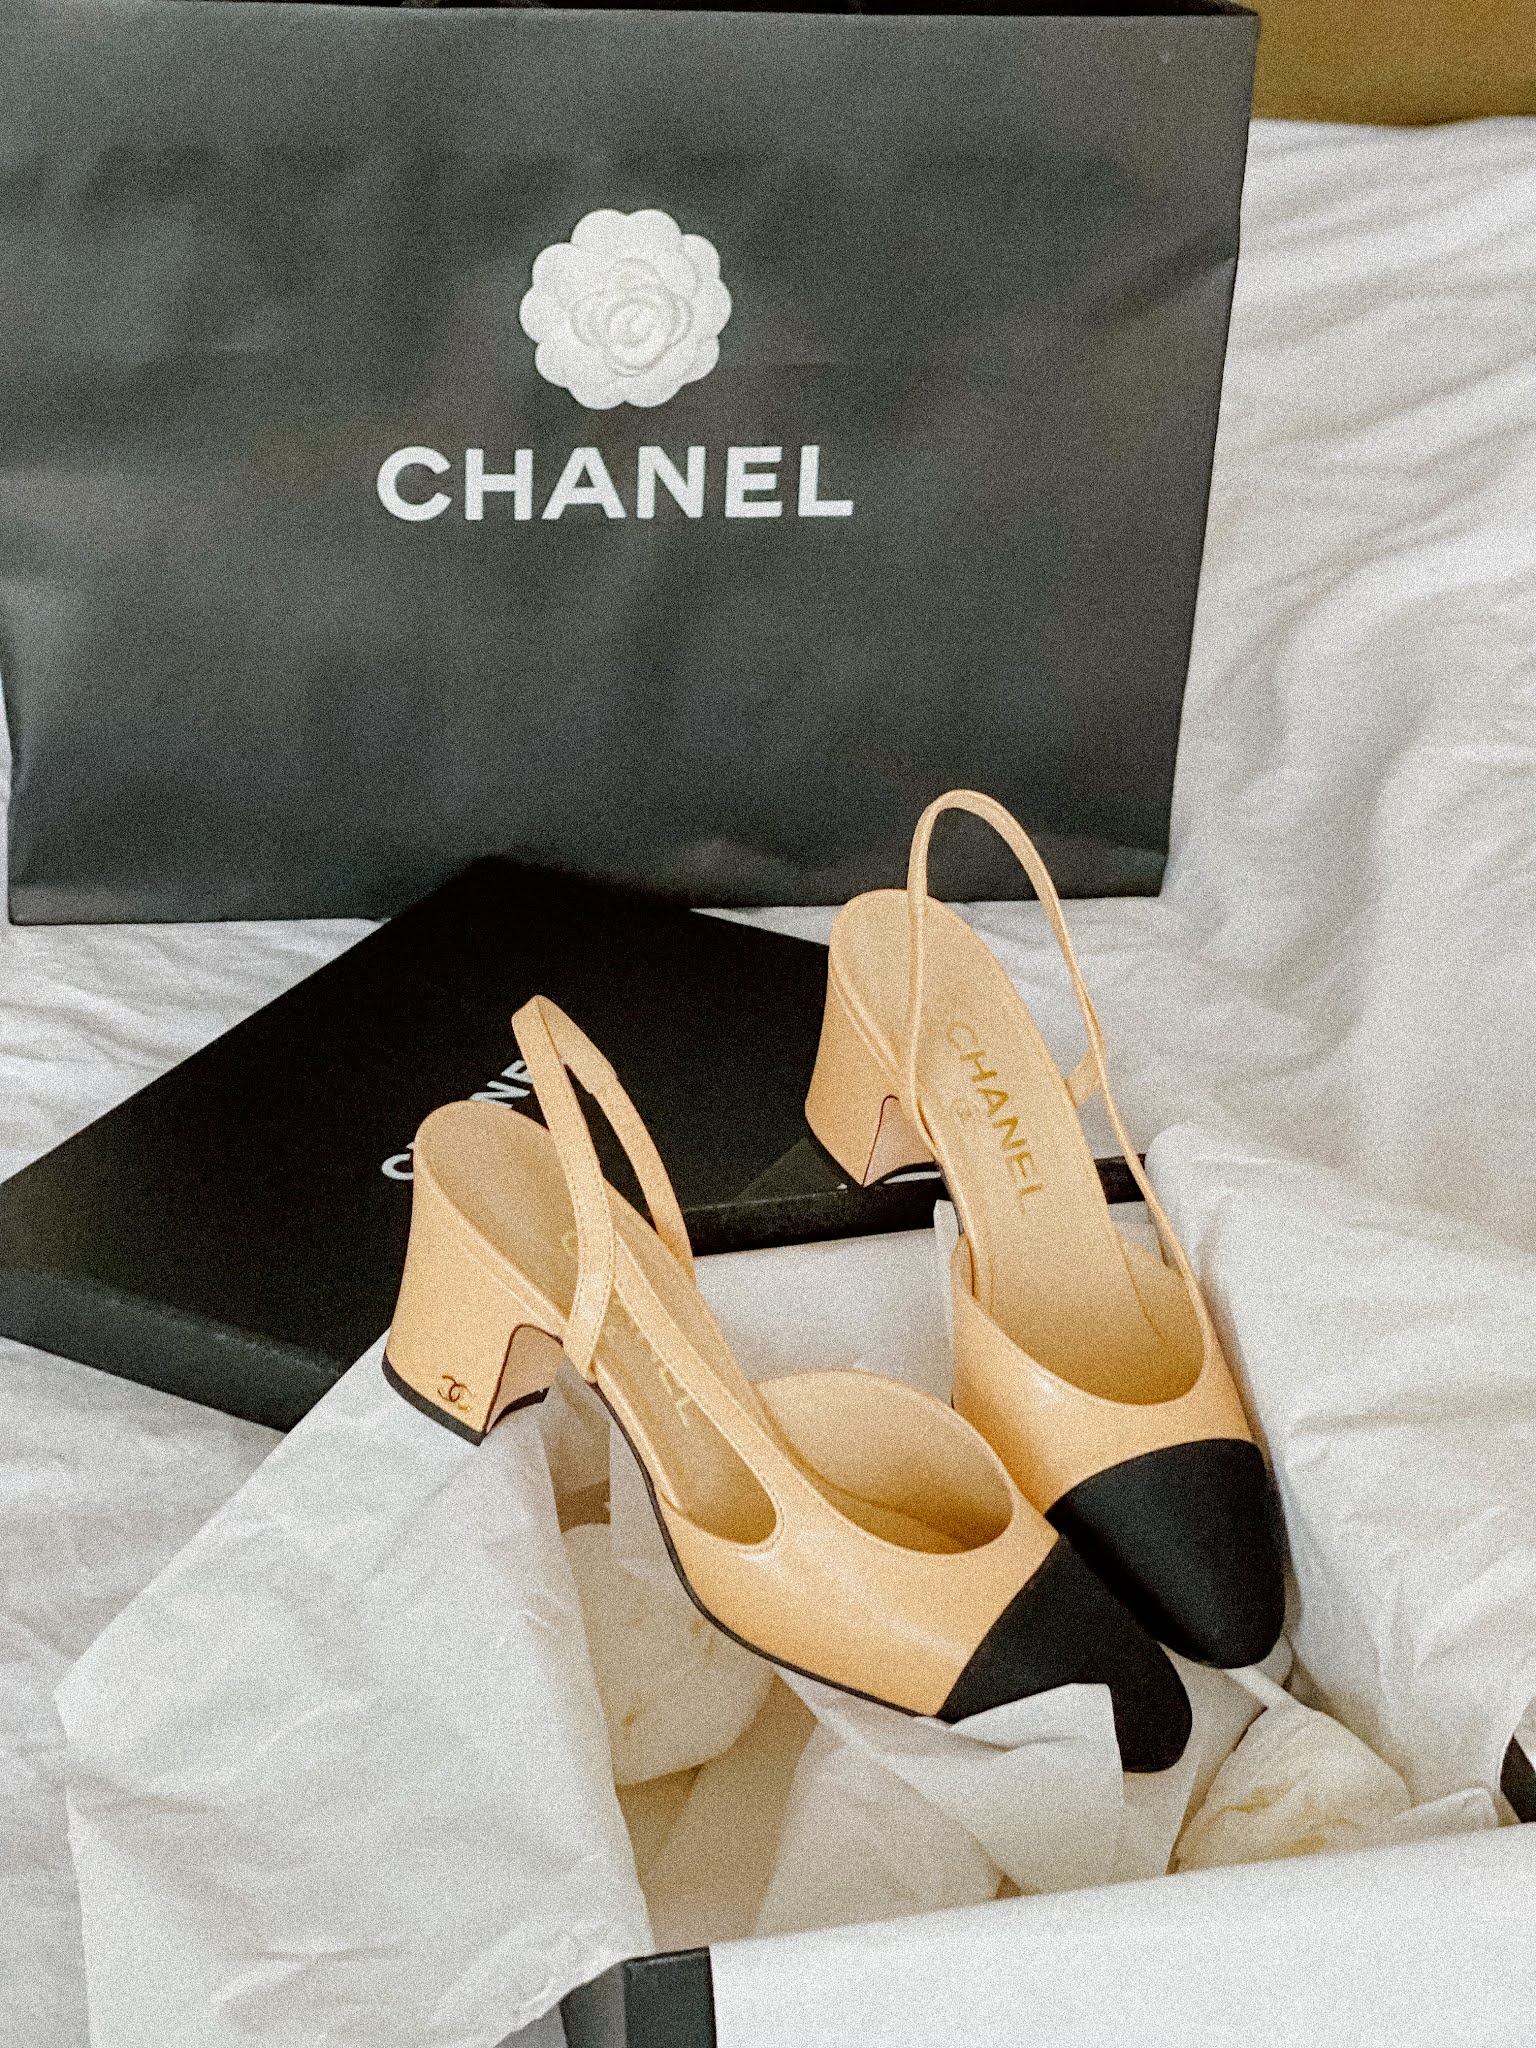 Why you SHOULDN'T buy the CHANEL SLINGBACKS (or maybe you should?) I Review,  Price, Quality, Comfort 